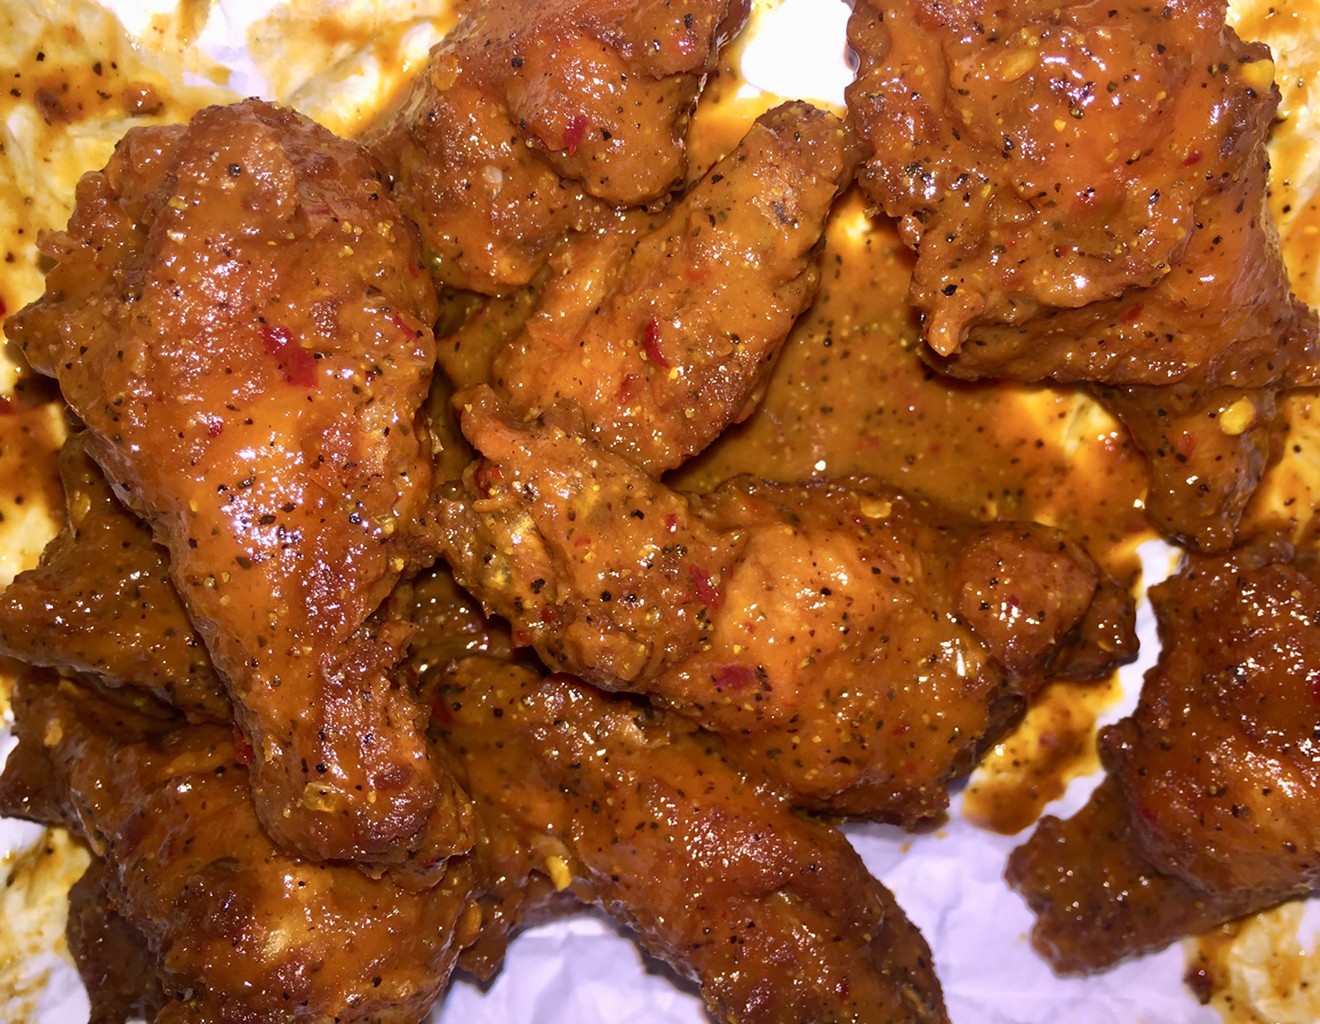 The Angry Mustard Wings at Zesty Zzeeks Pizza.